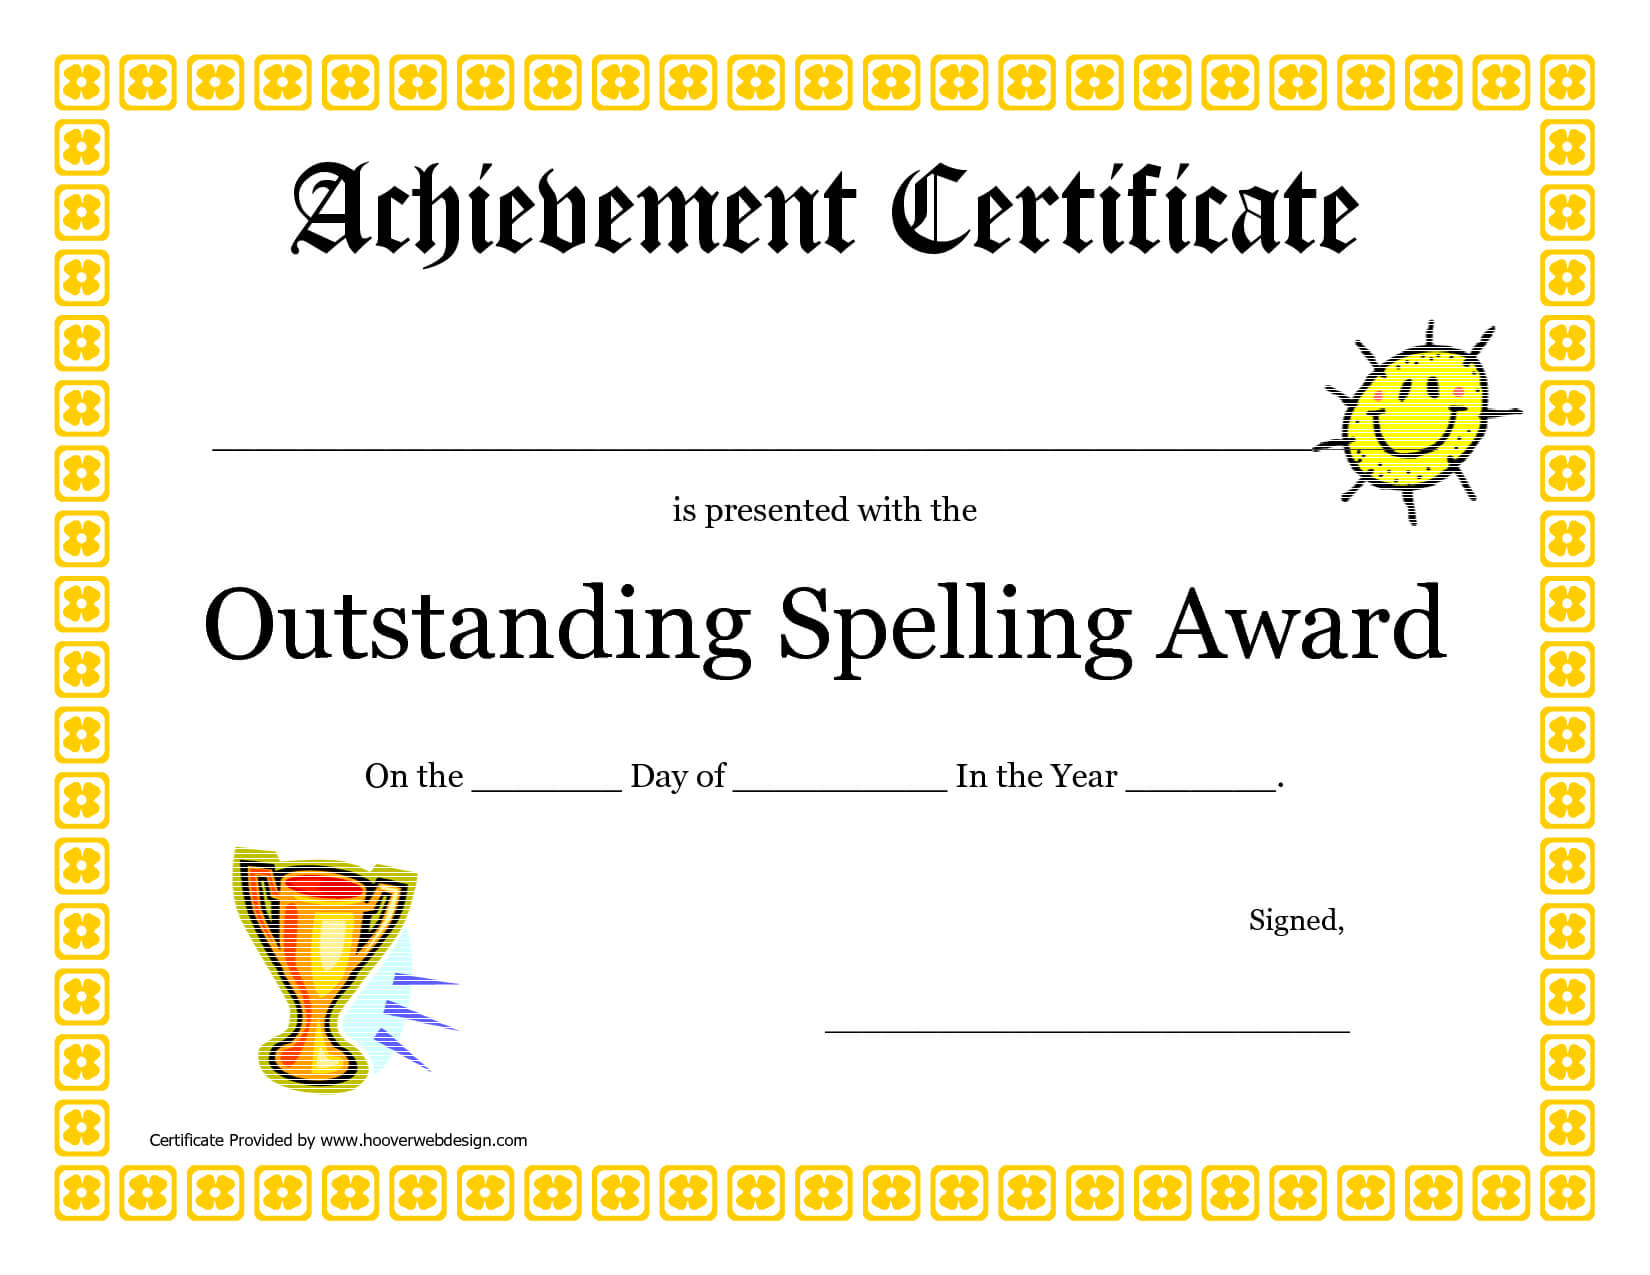 Outstanding Spelling Award Printable Certificate Pdf Picture Within Classroom Certificates Templates